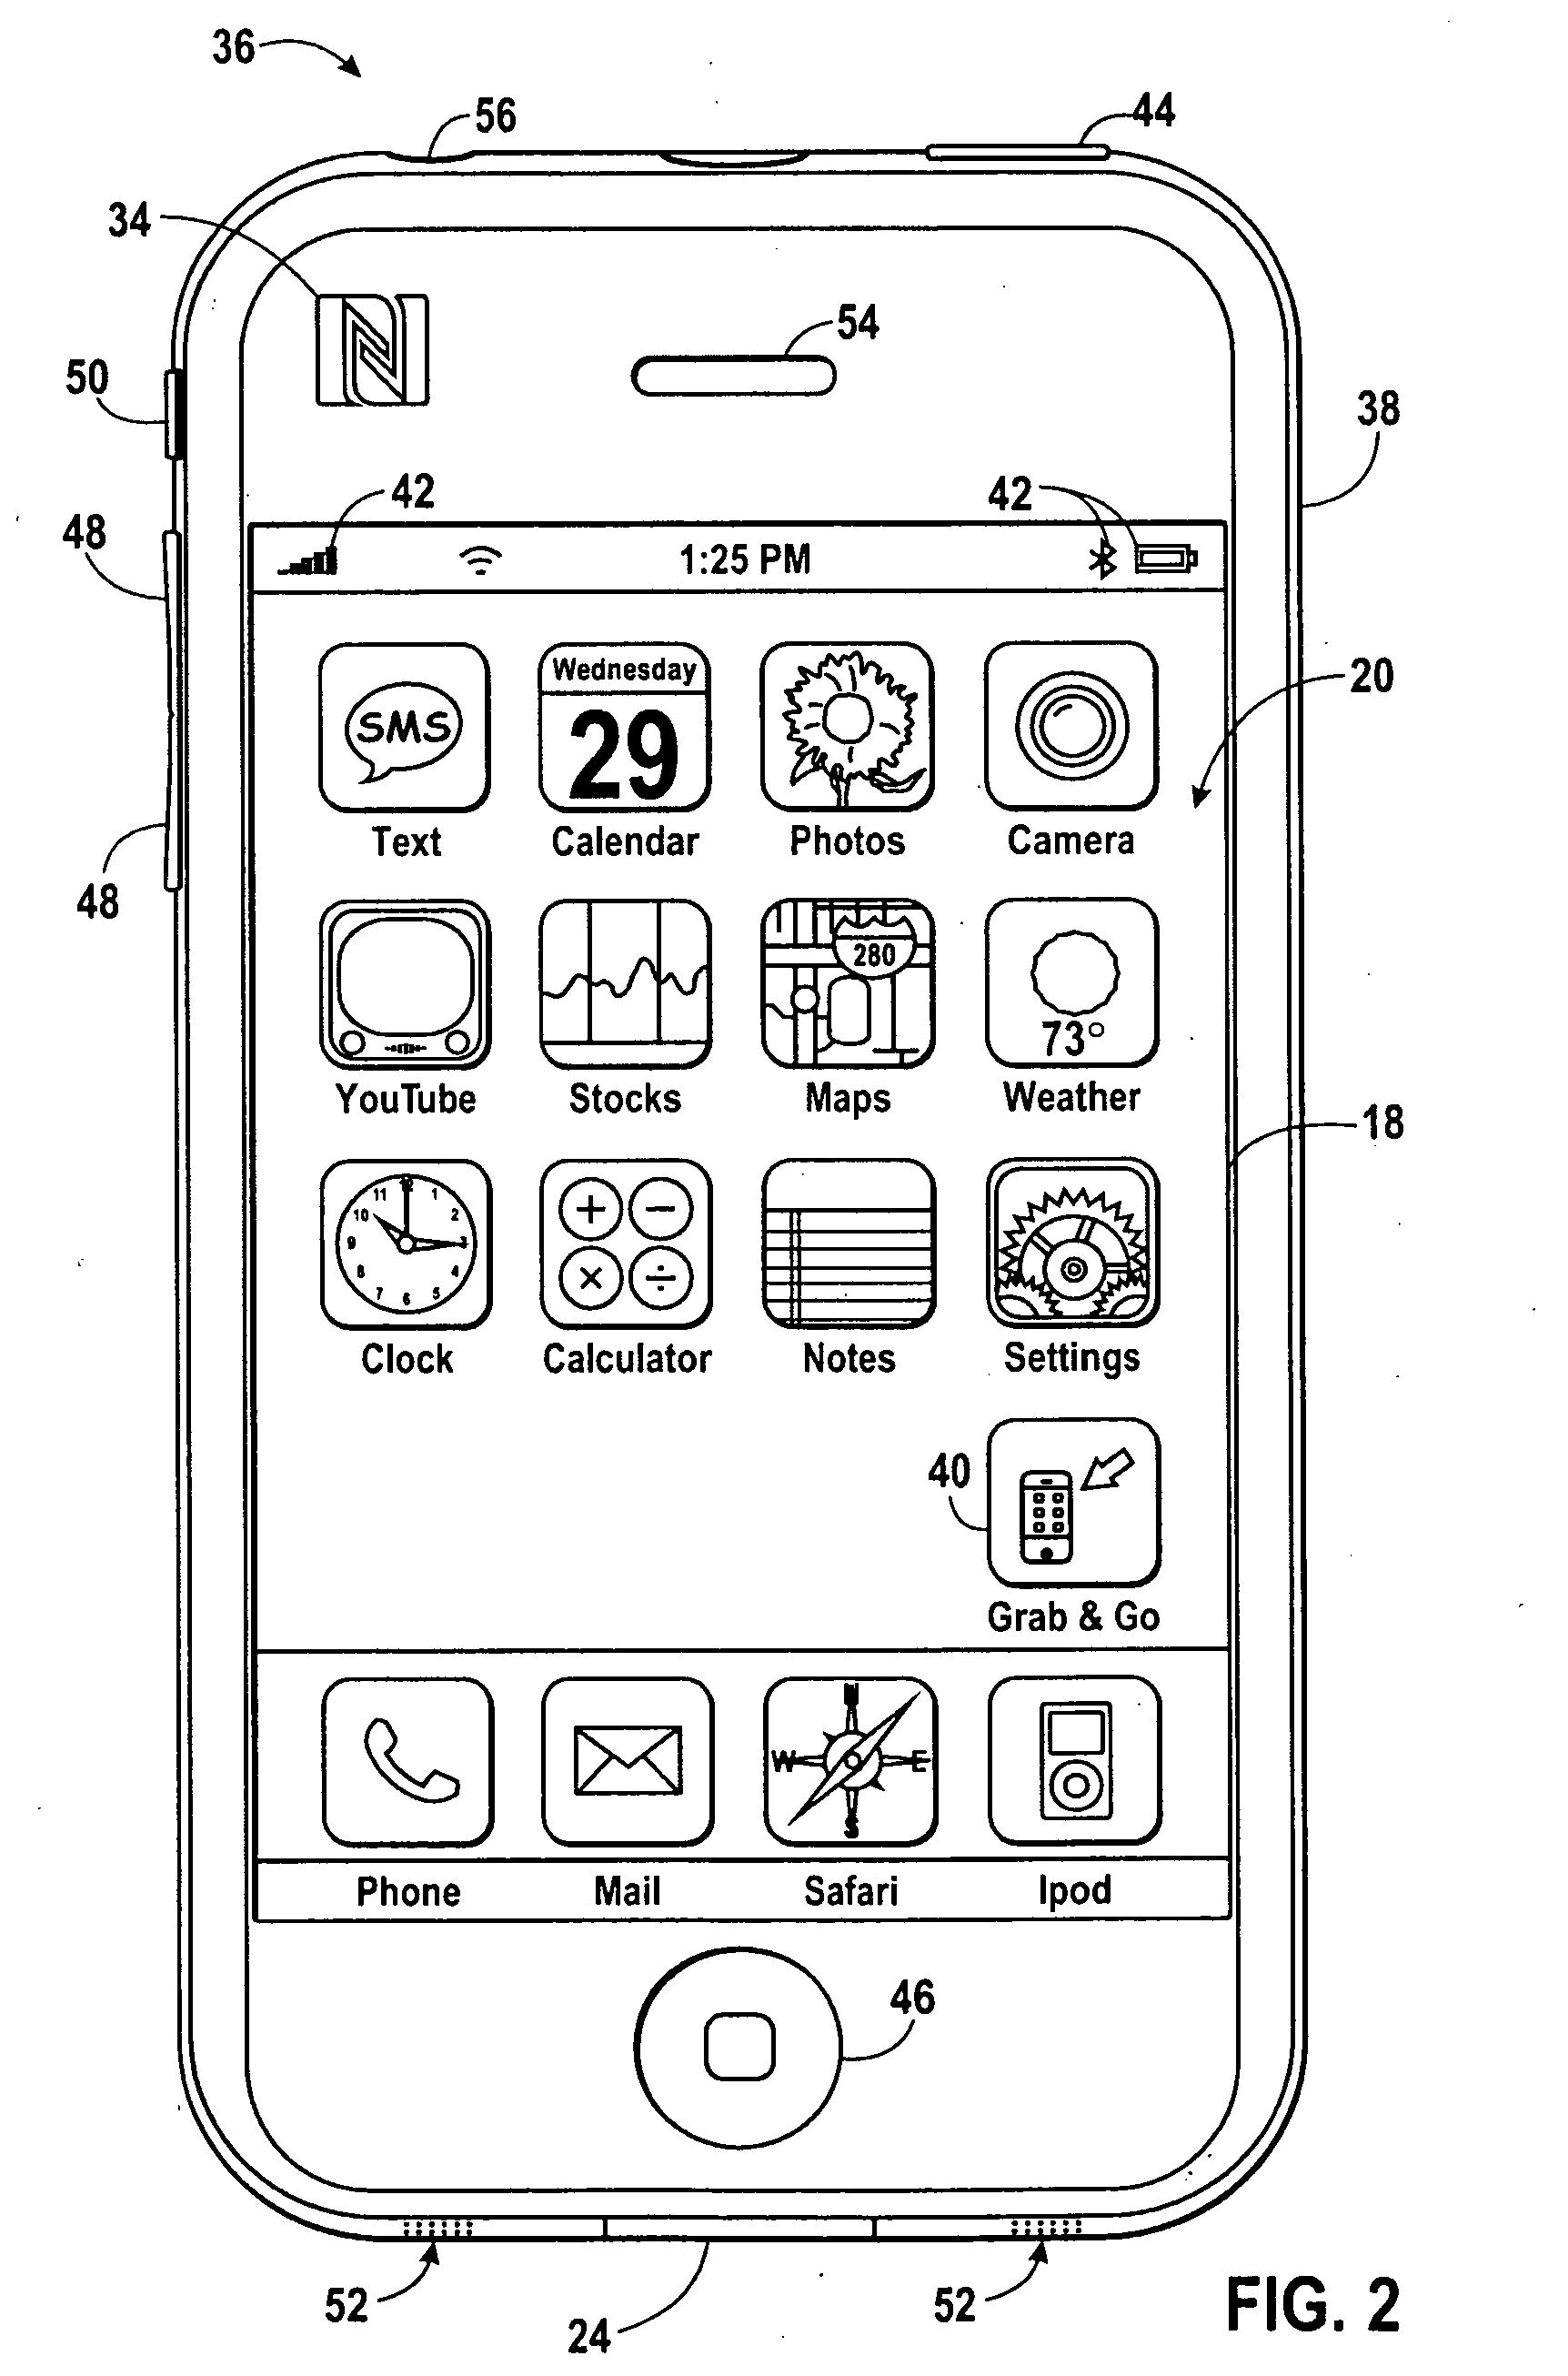 System and method for placeshifting media playback